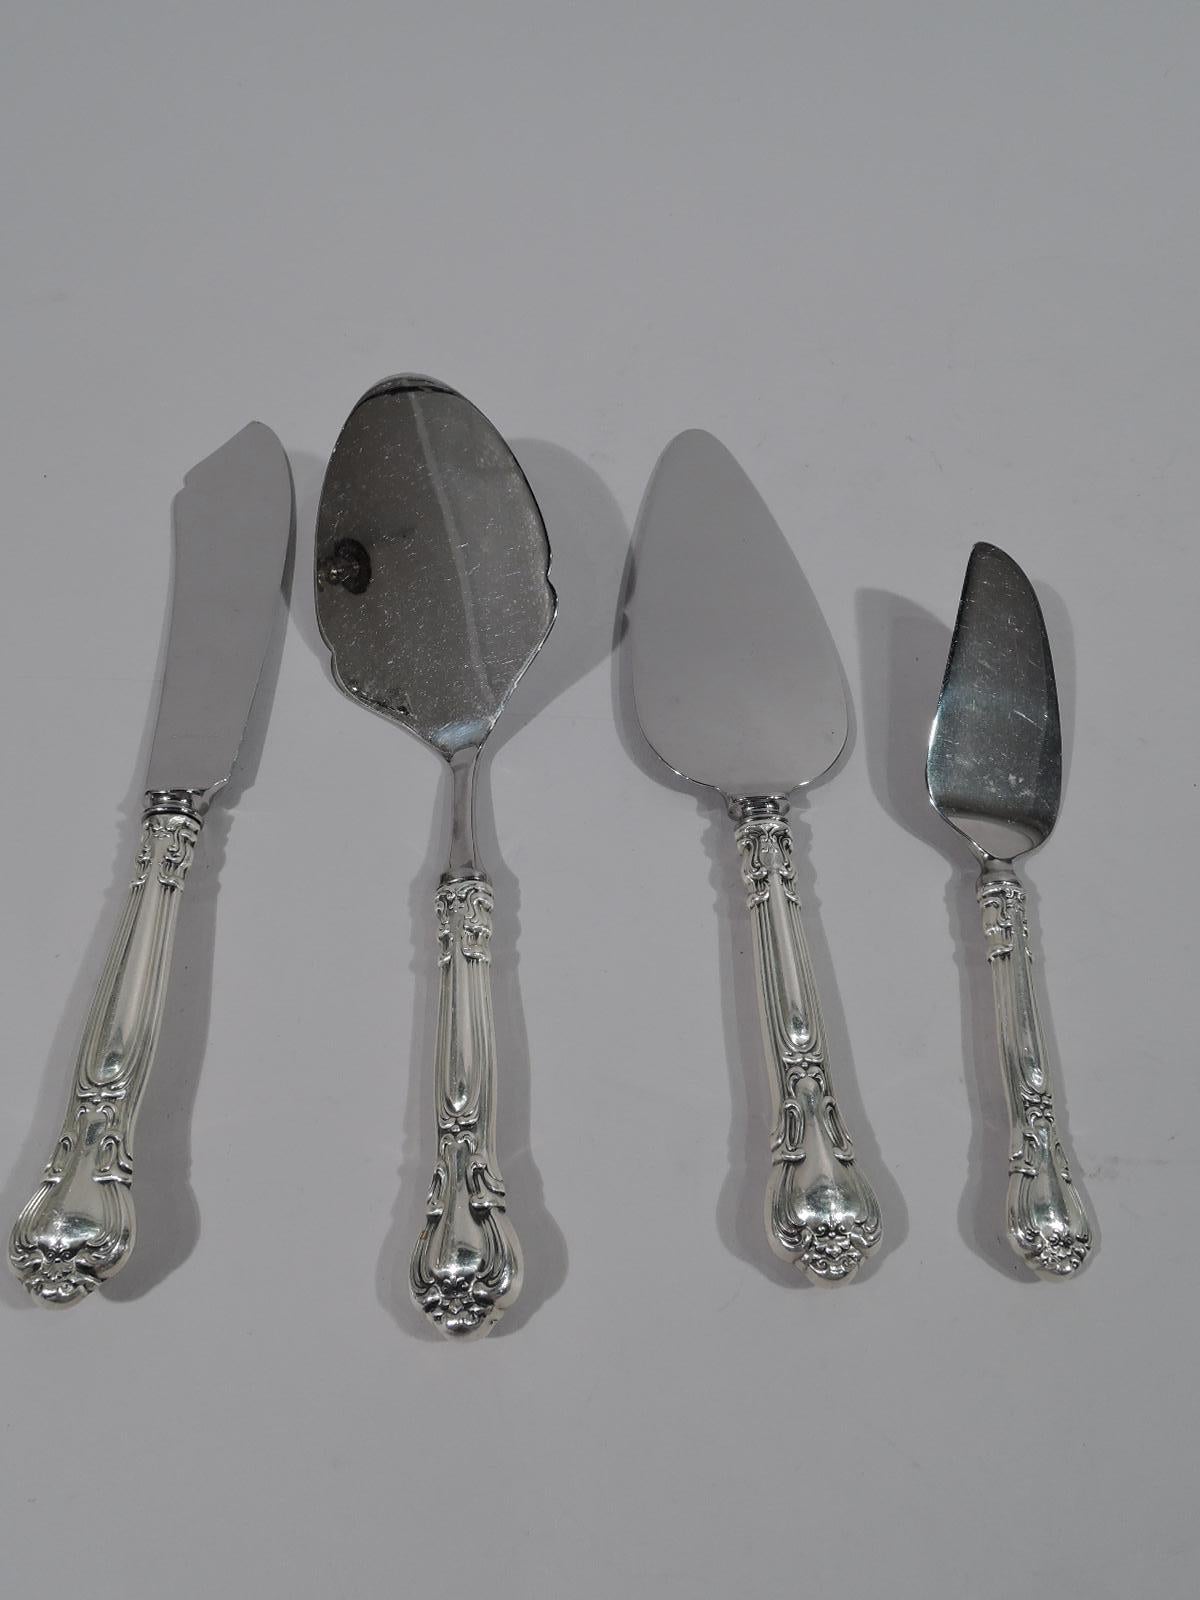 Sterling silver set in Chantilly pattern. Made by Gorham in Providence.

This set comprises 96 pieces (dimensions in inches): Forks: 12 regular forks (7), 11 salad forks (6 1/2), and 12 seafood cocktail forks (5 1/2); Spoons: 24 teaspoons (5 7/8)